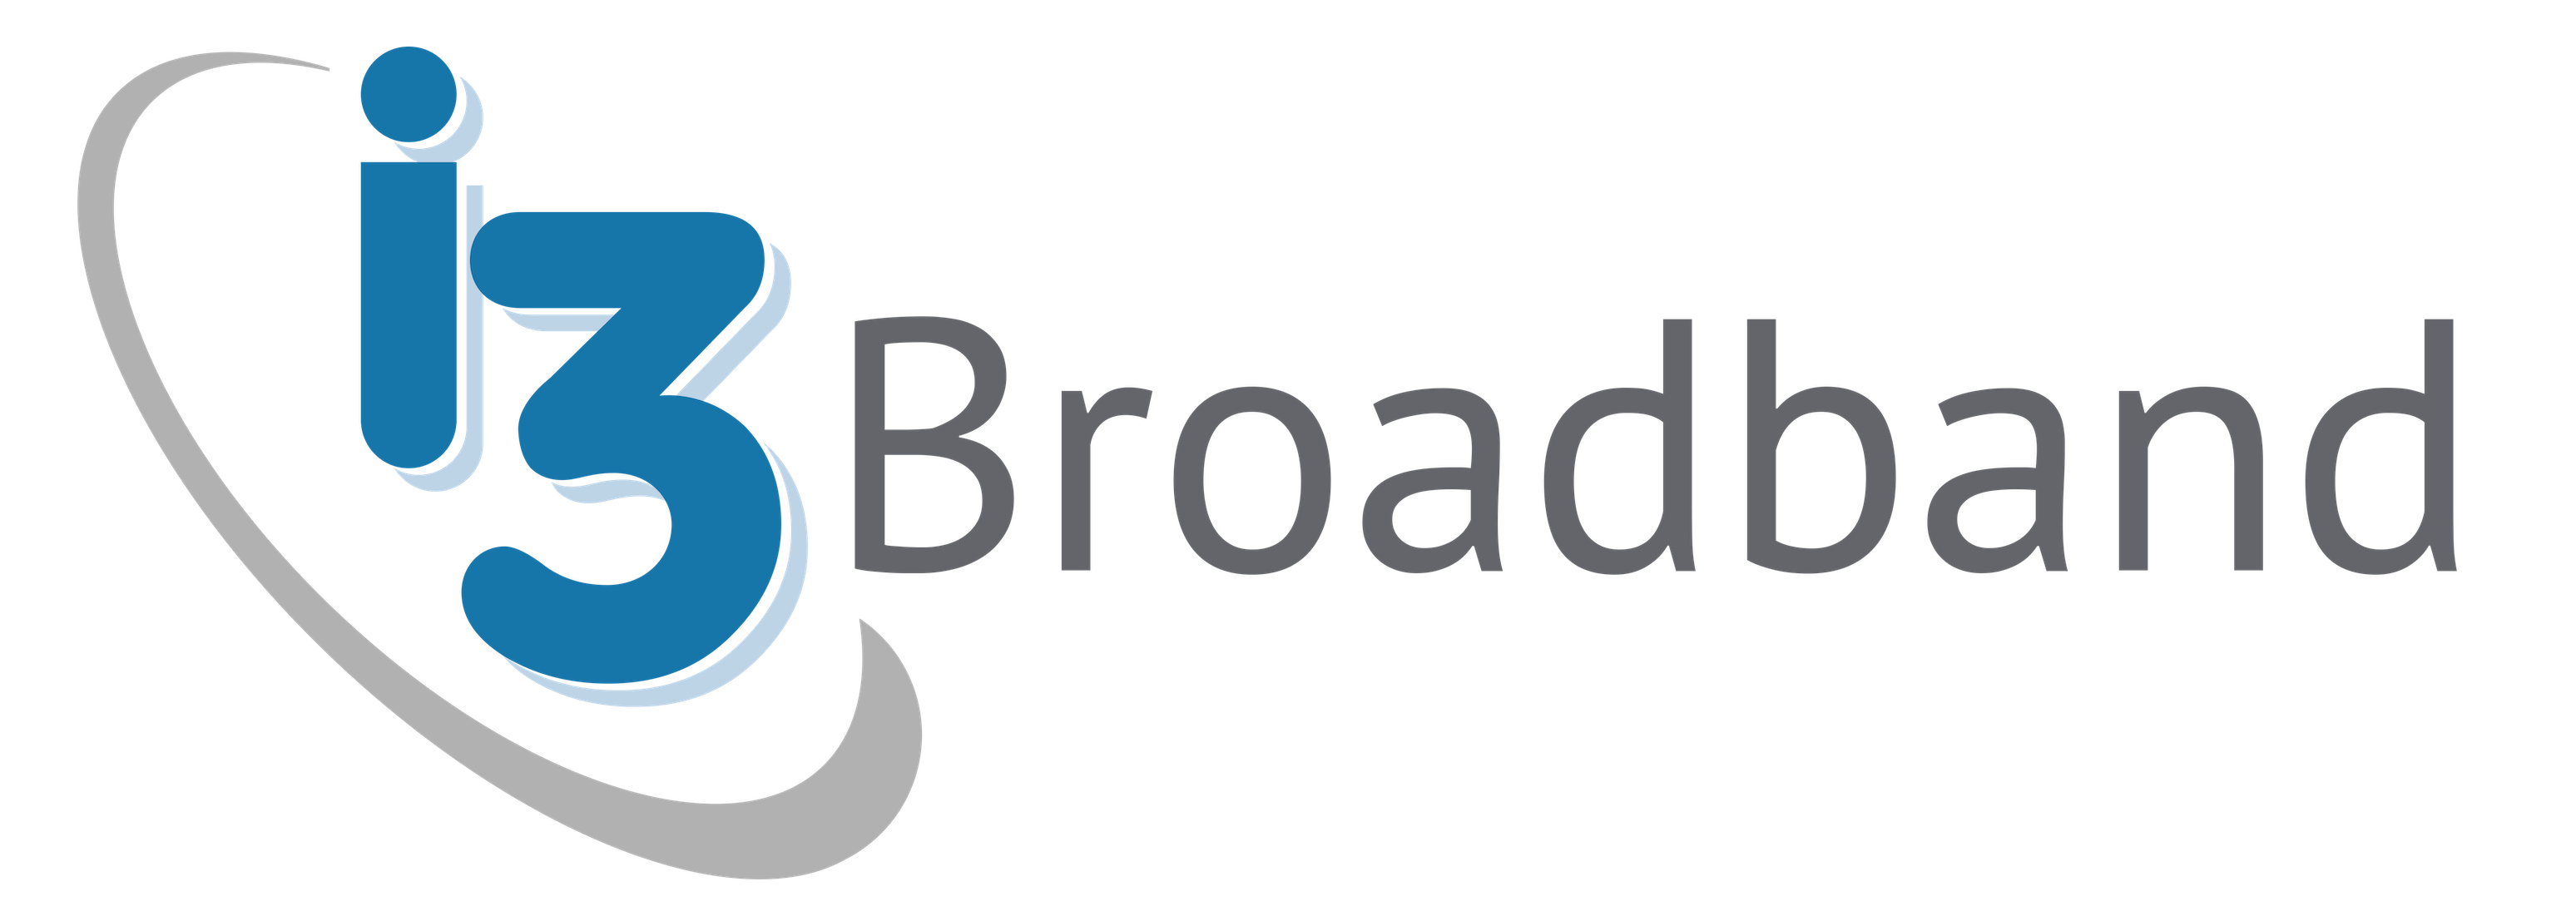 Excell Broadband - Crunchbase Company Profile & Funding